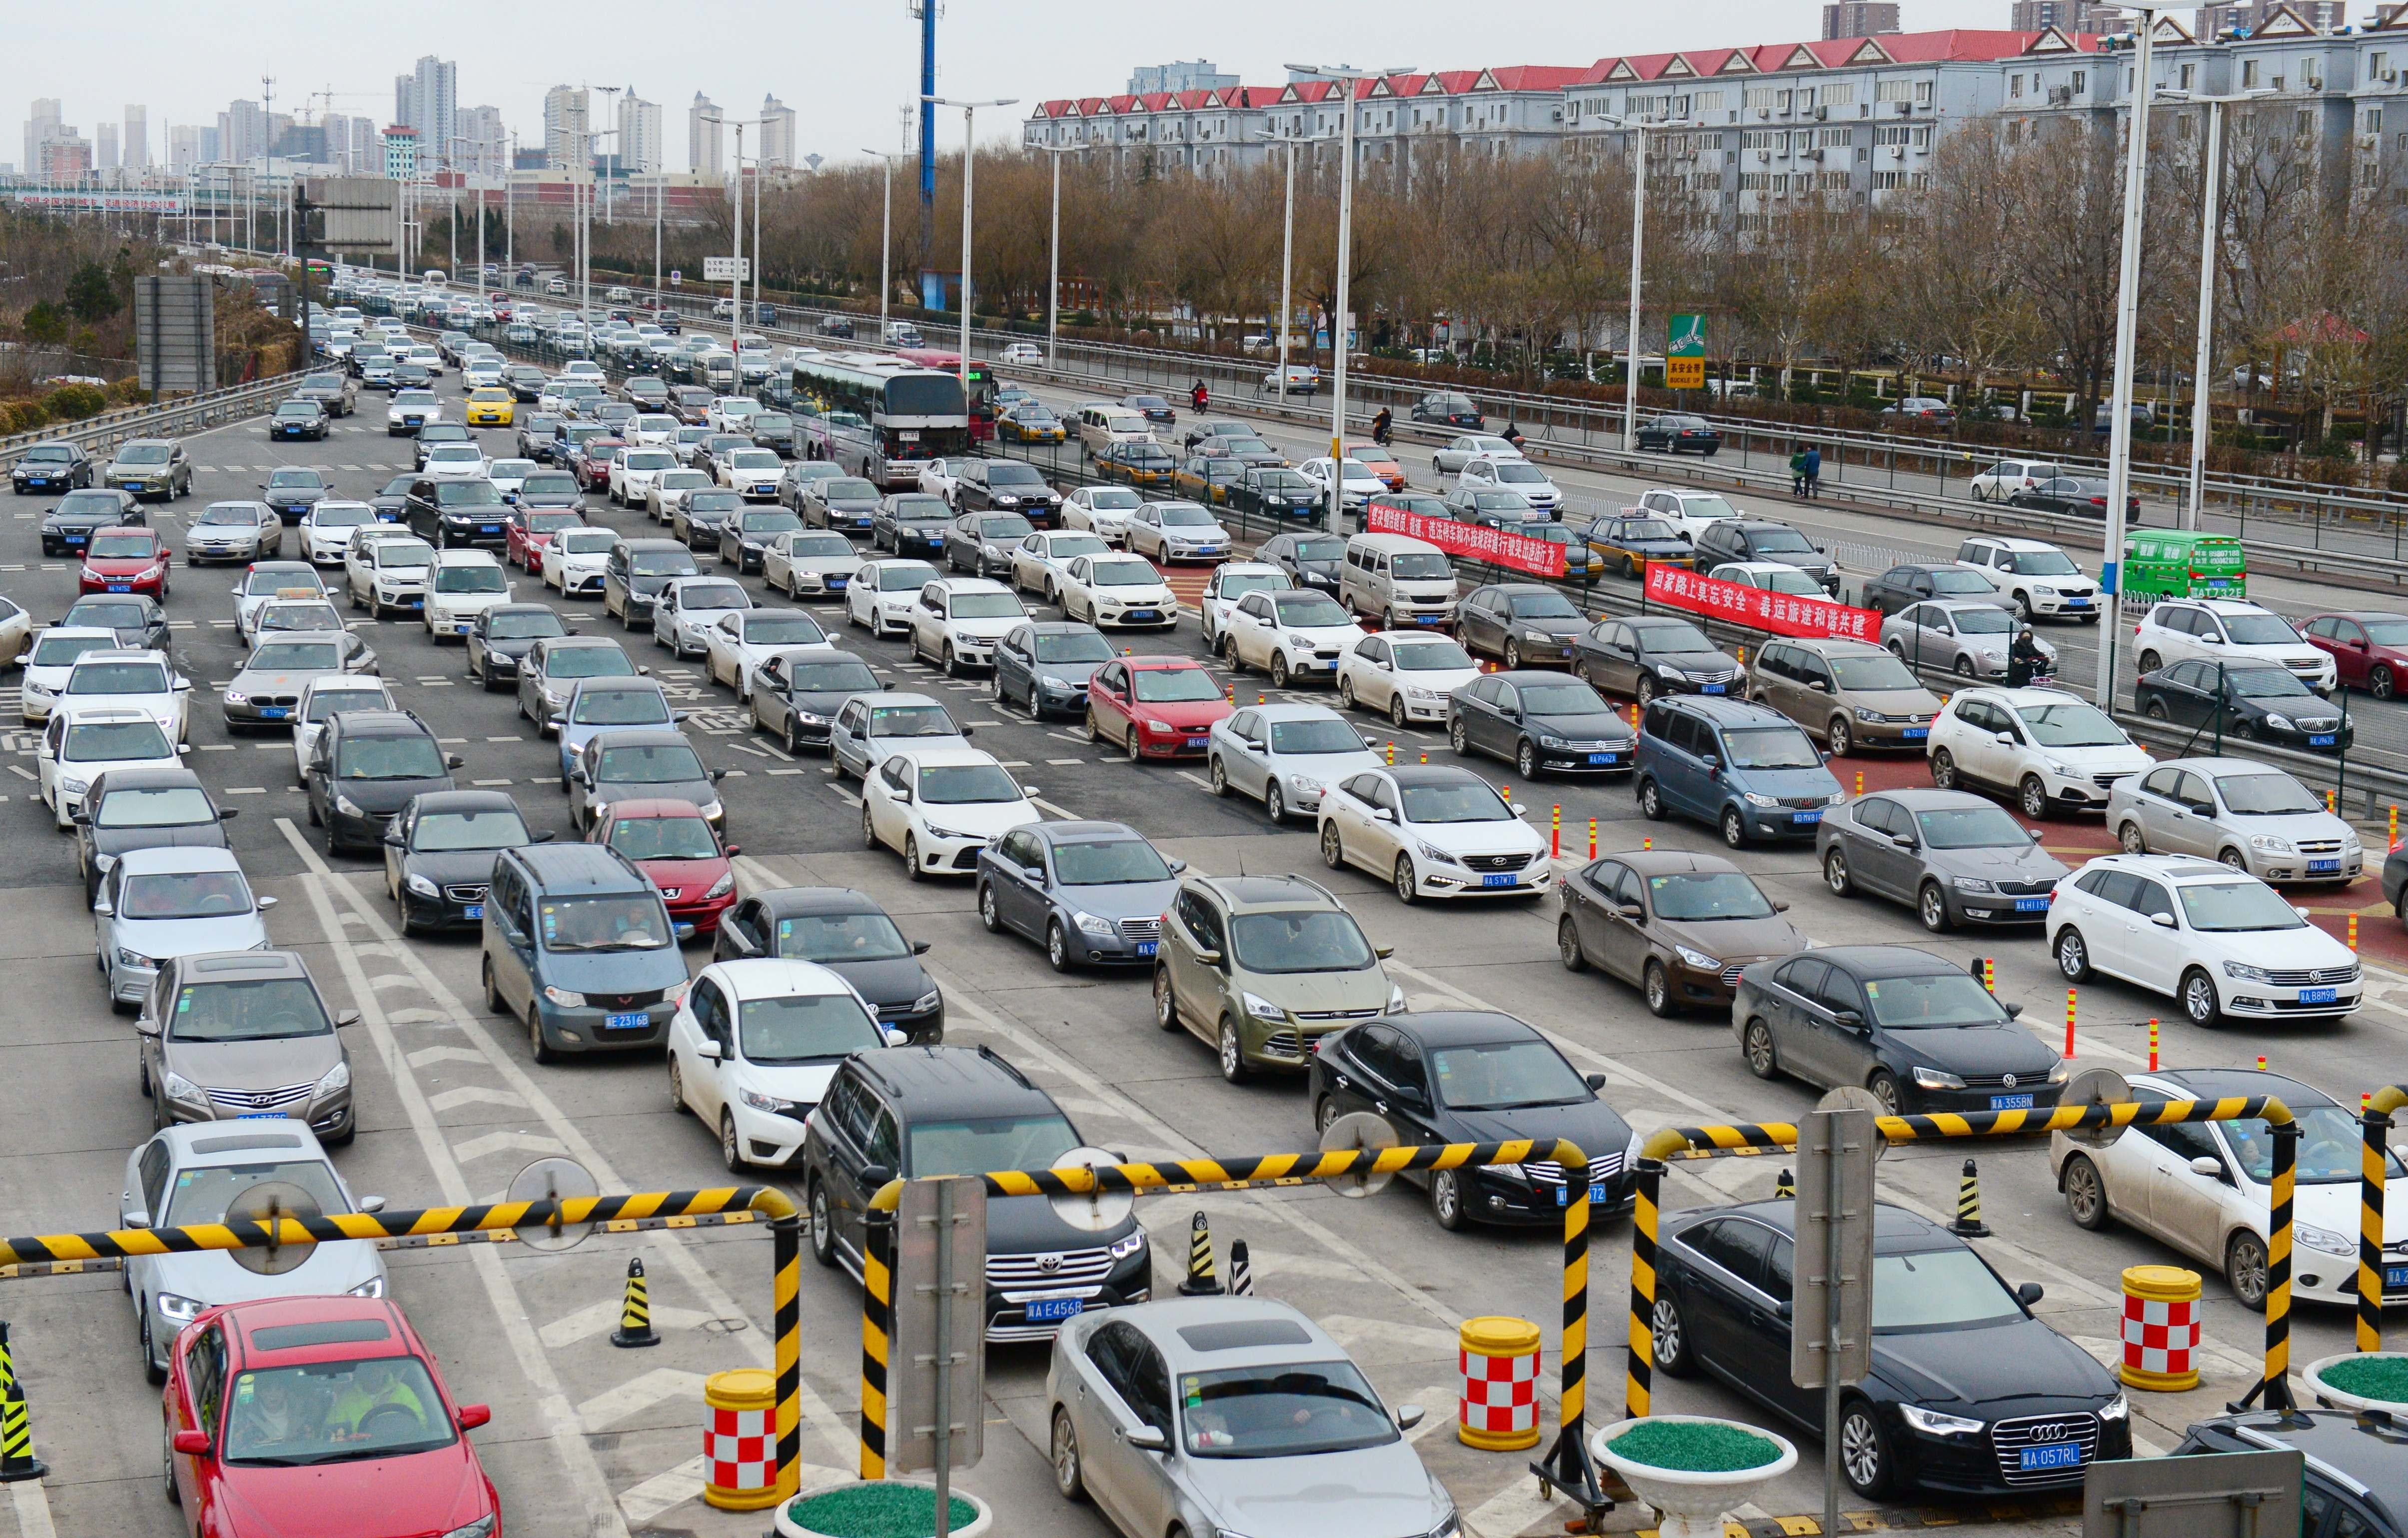 Technology is increasingly disrupting the traditional car-buying industry in China. Photo: Xinhua